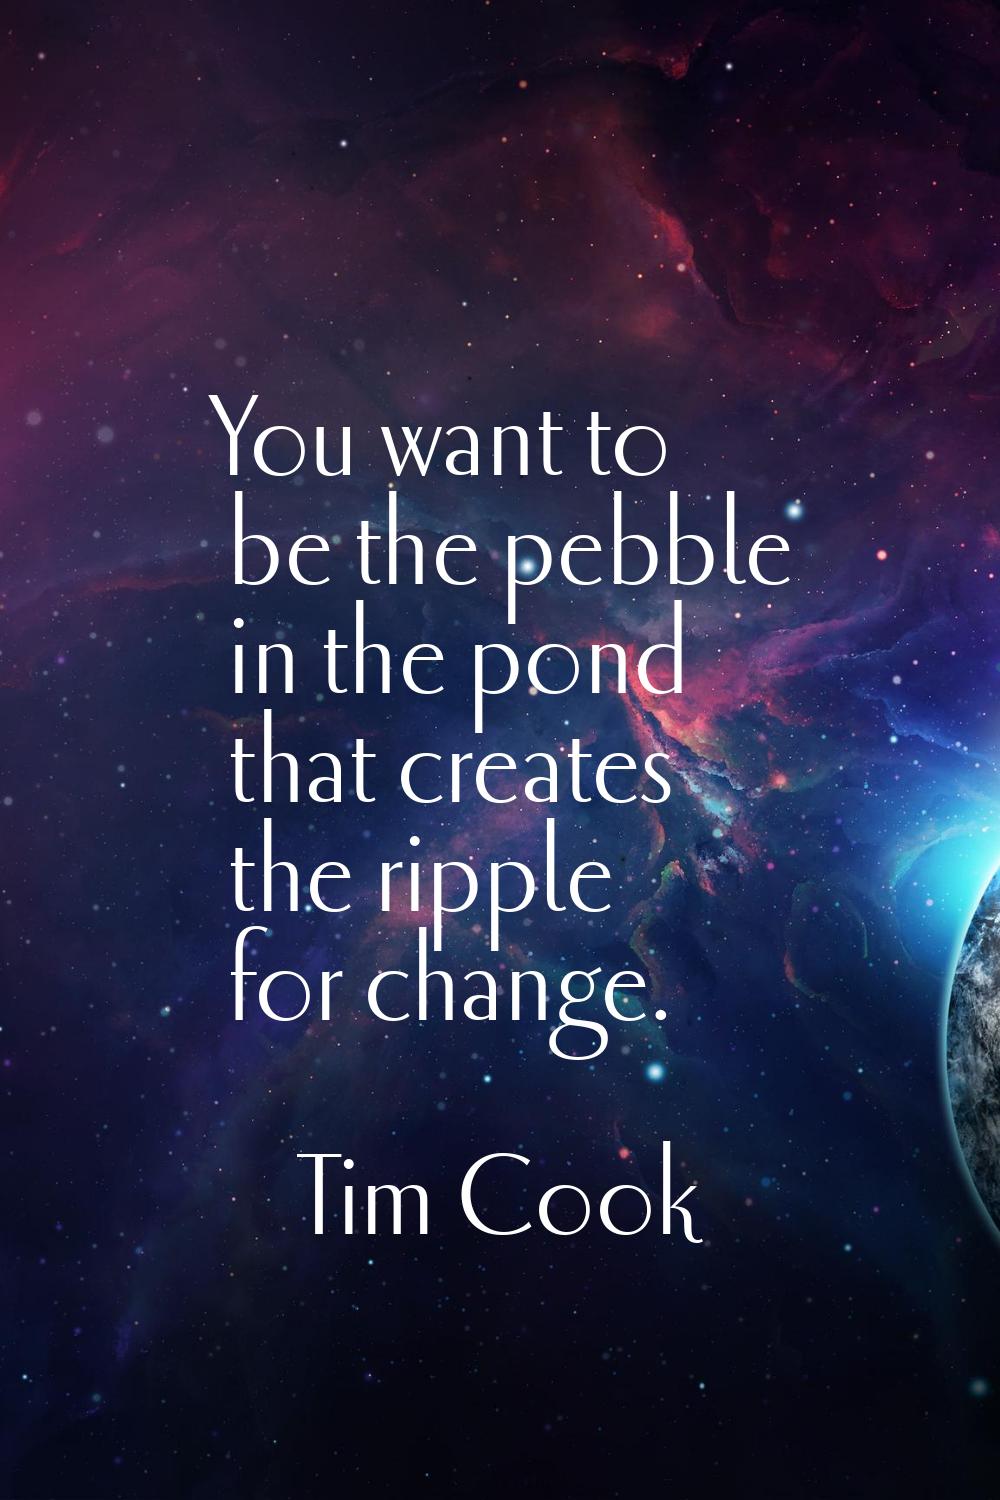 You want to be the pebble in the pond that creates the ripple for change.